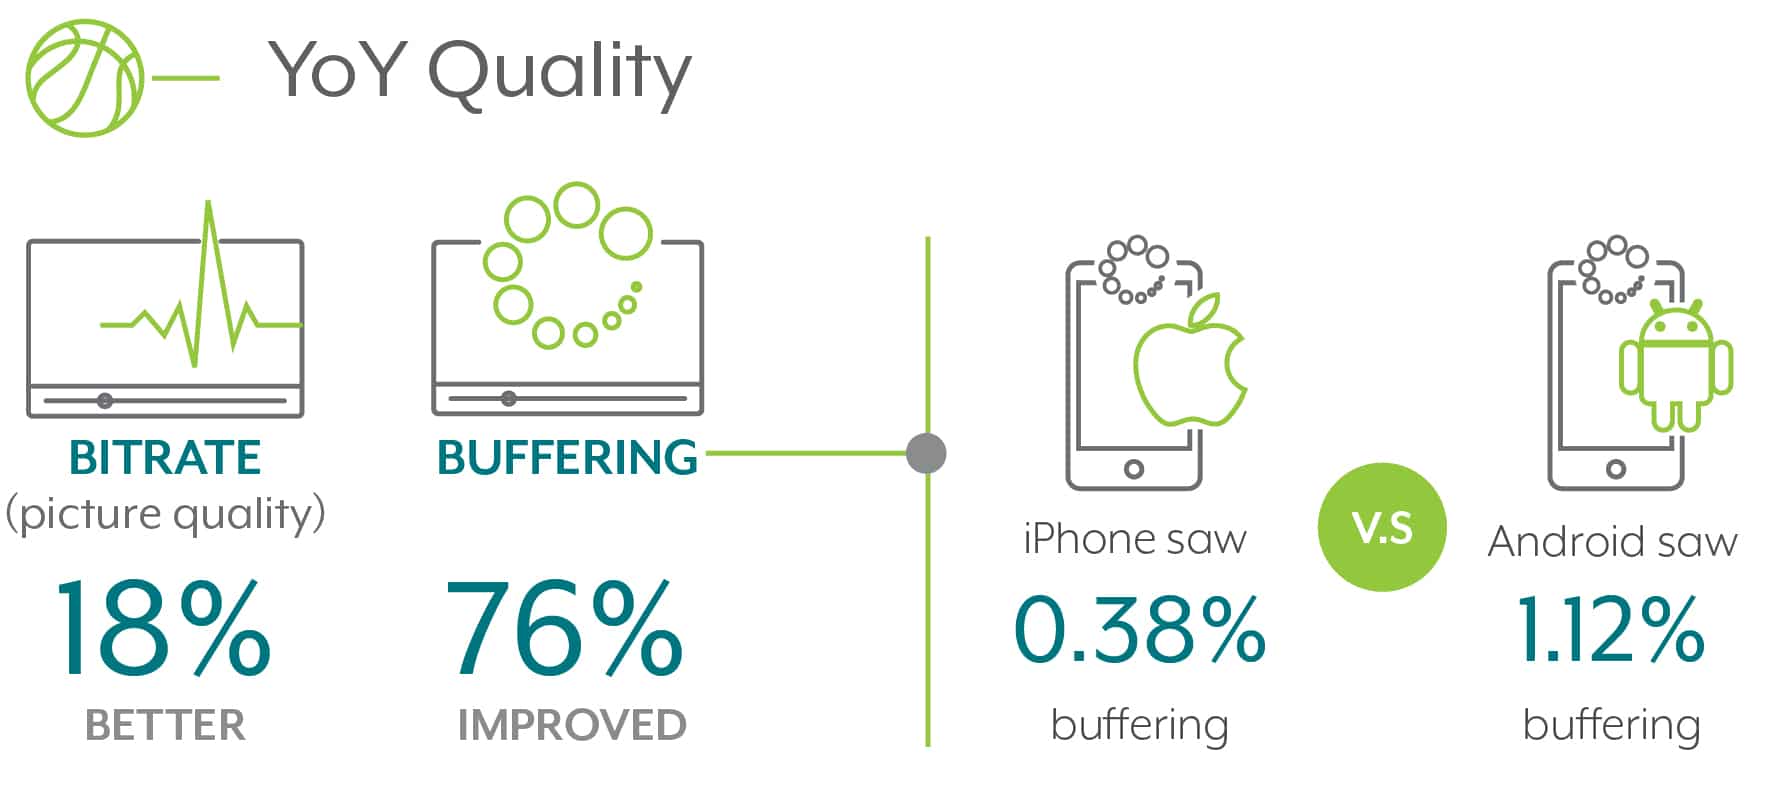 YoY Quality Mobile Phone Comparison On Bitrate And Buffering Where Iphone Wins.